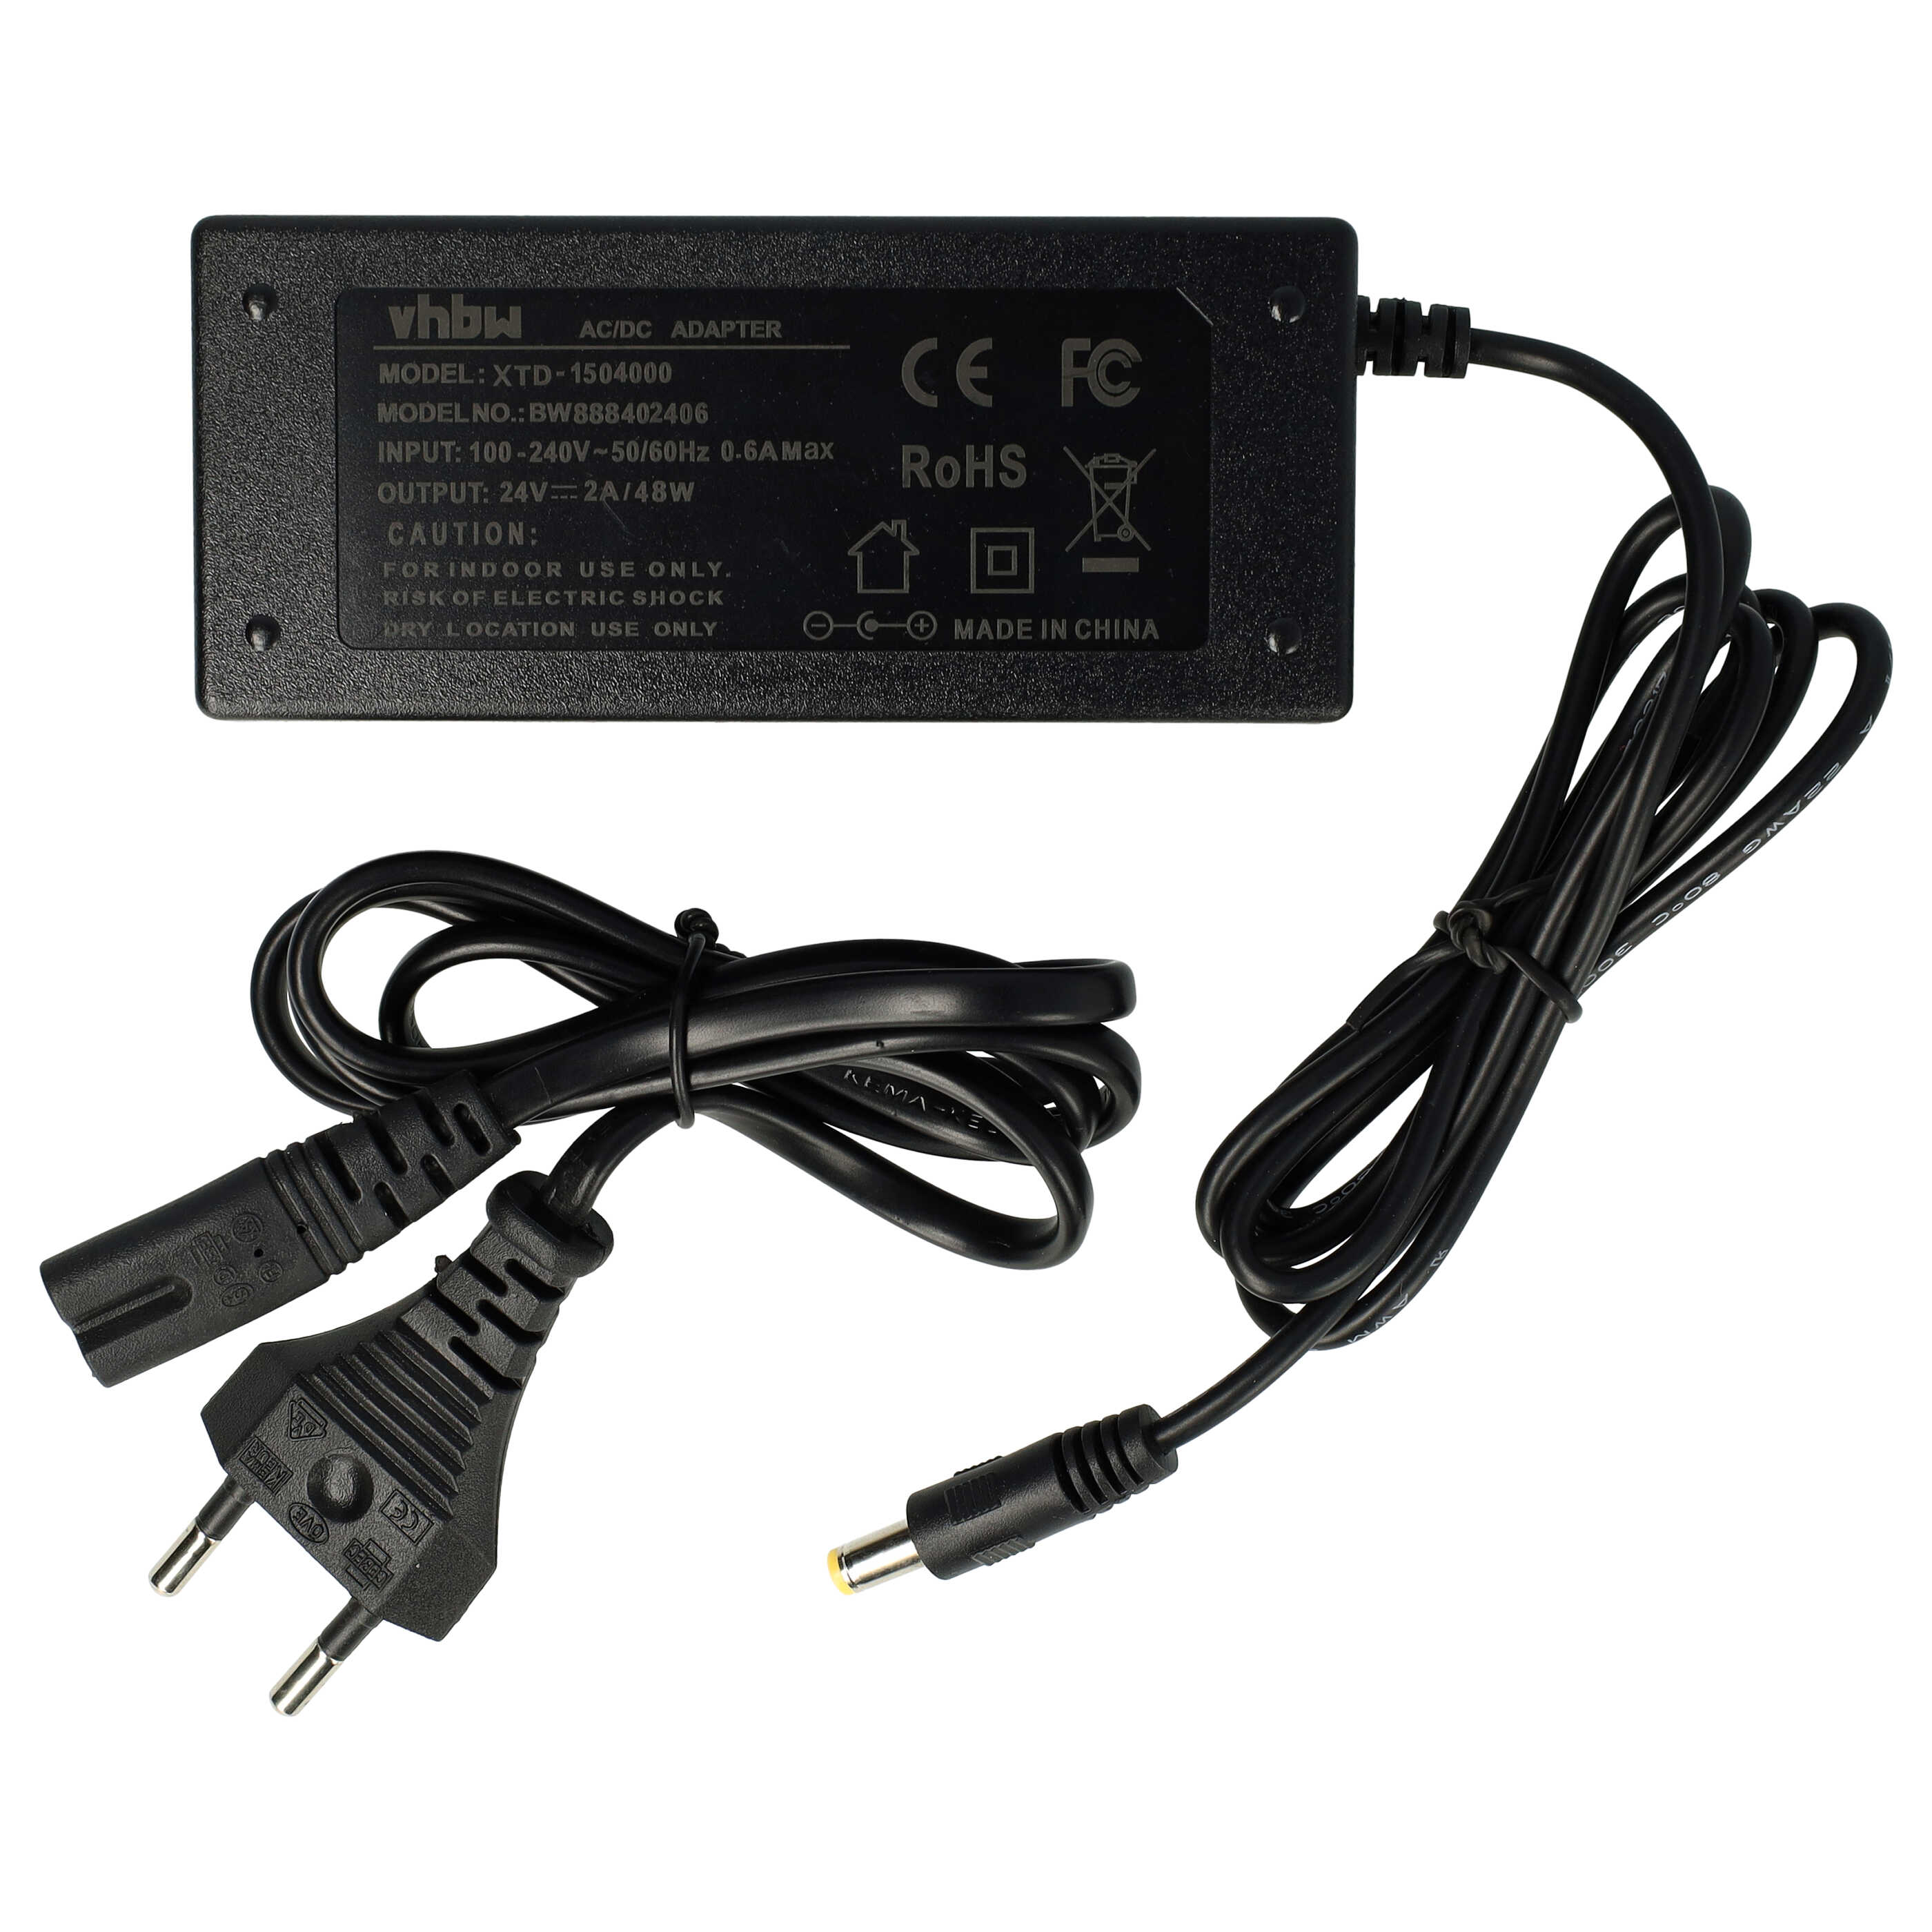 Mains Power Adapter with 5.5 x 2.5 mm Plug suitable for various Electric Devices - 24 V, 2 A